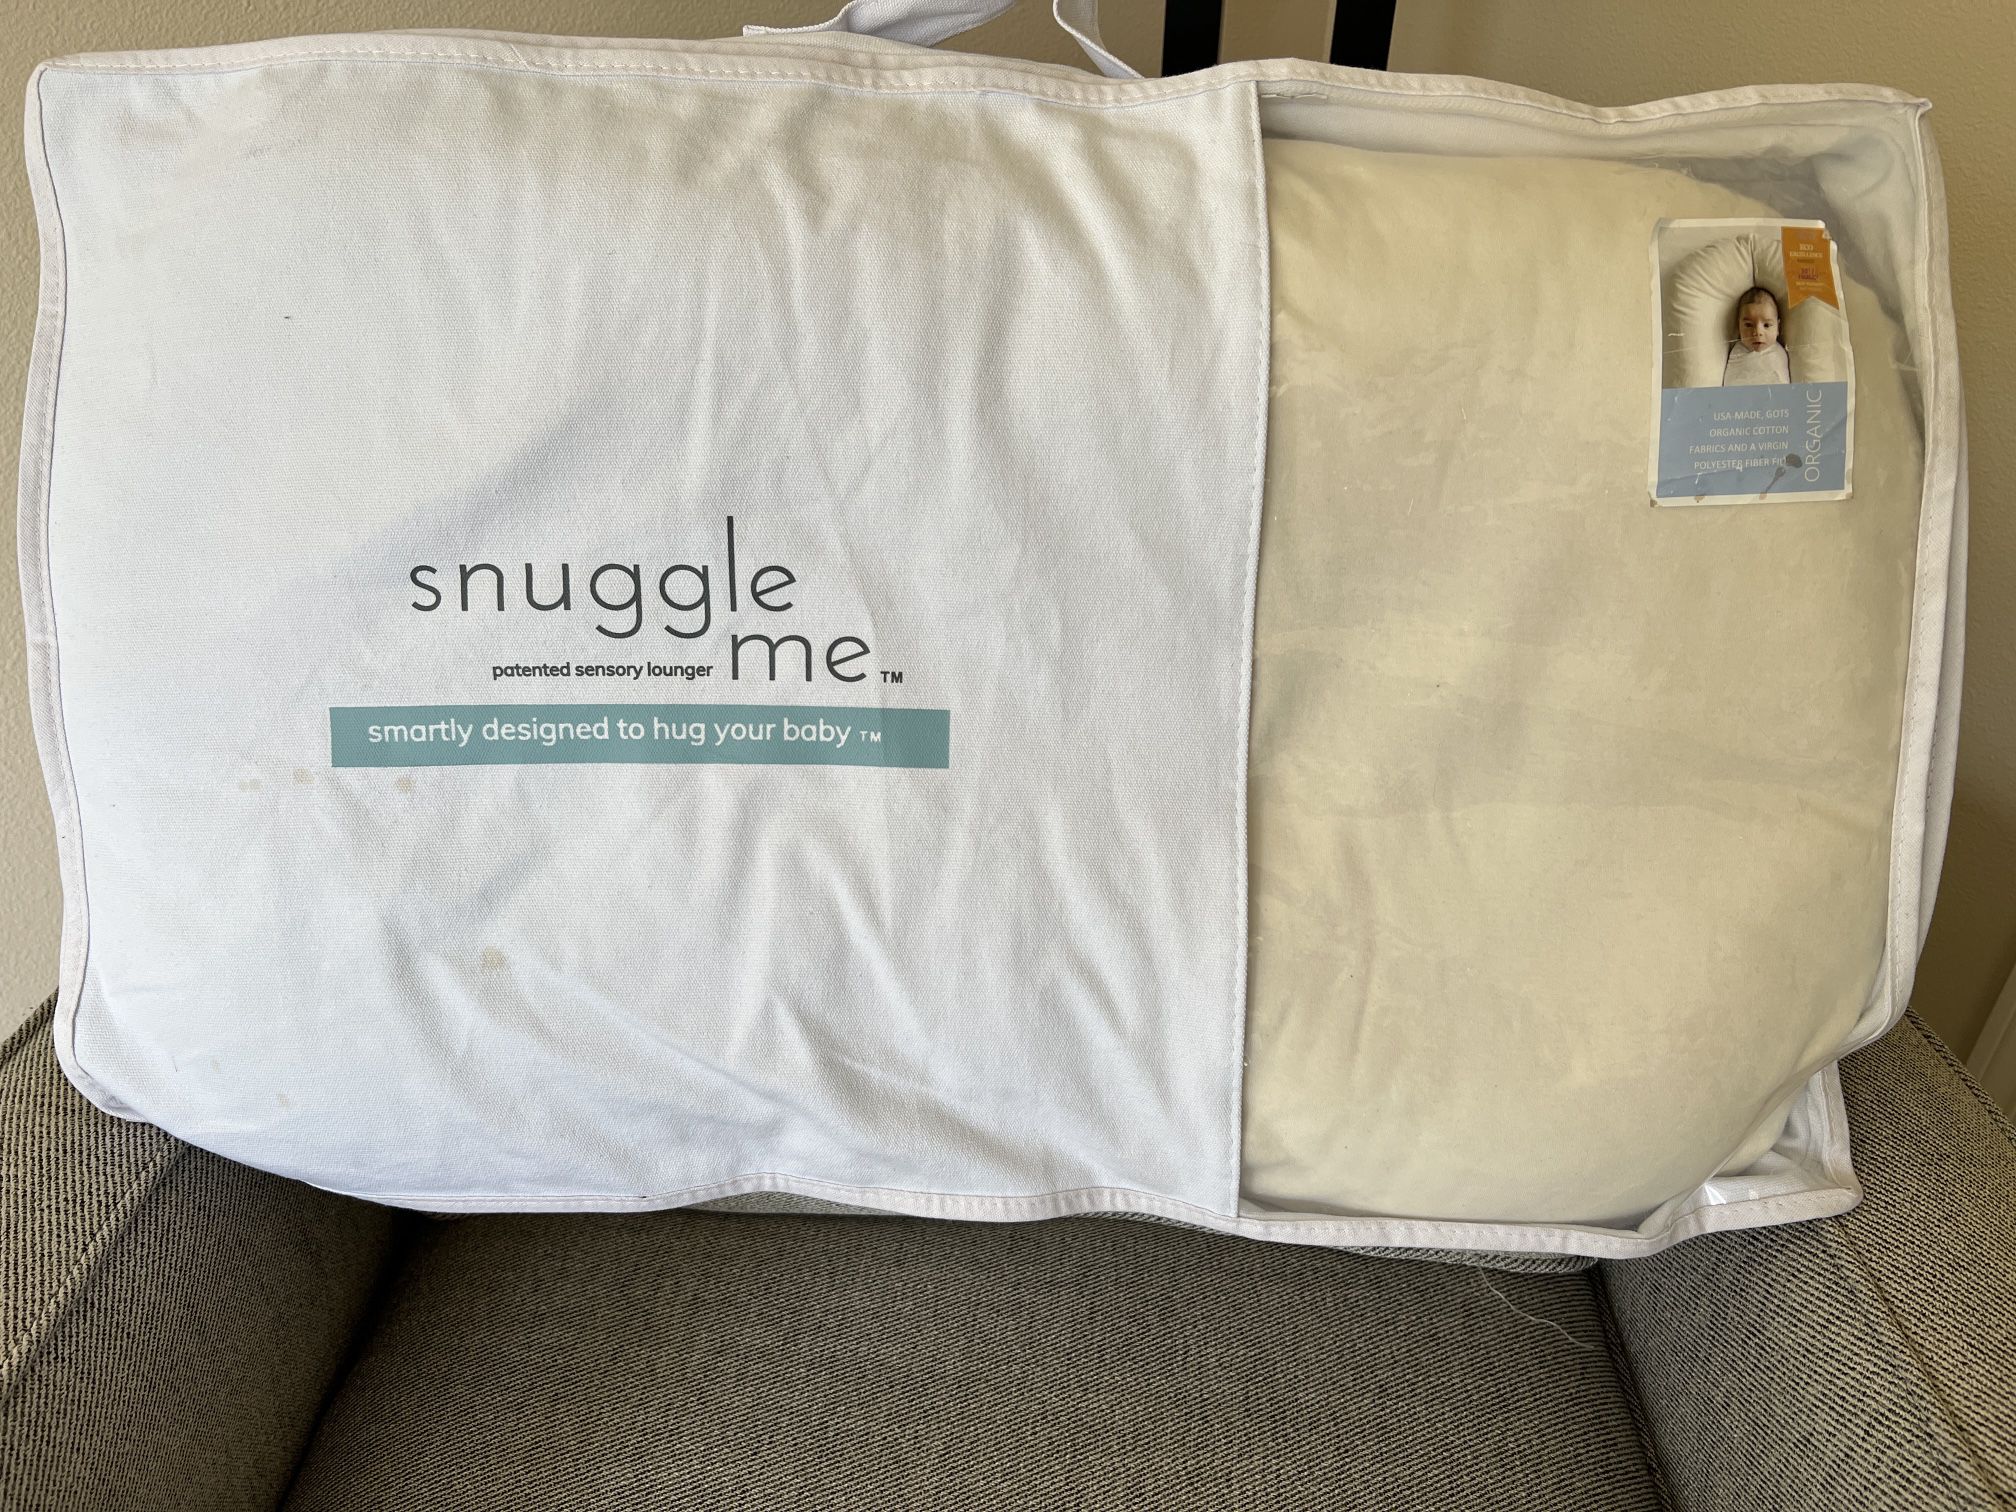 Snuggle Me Baby Lounger